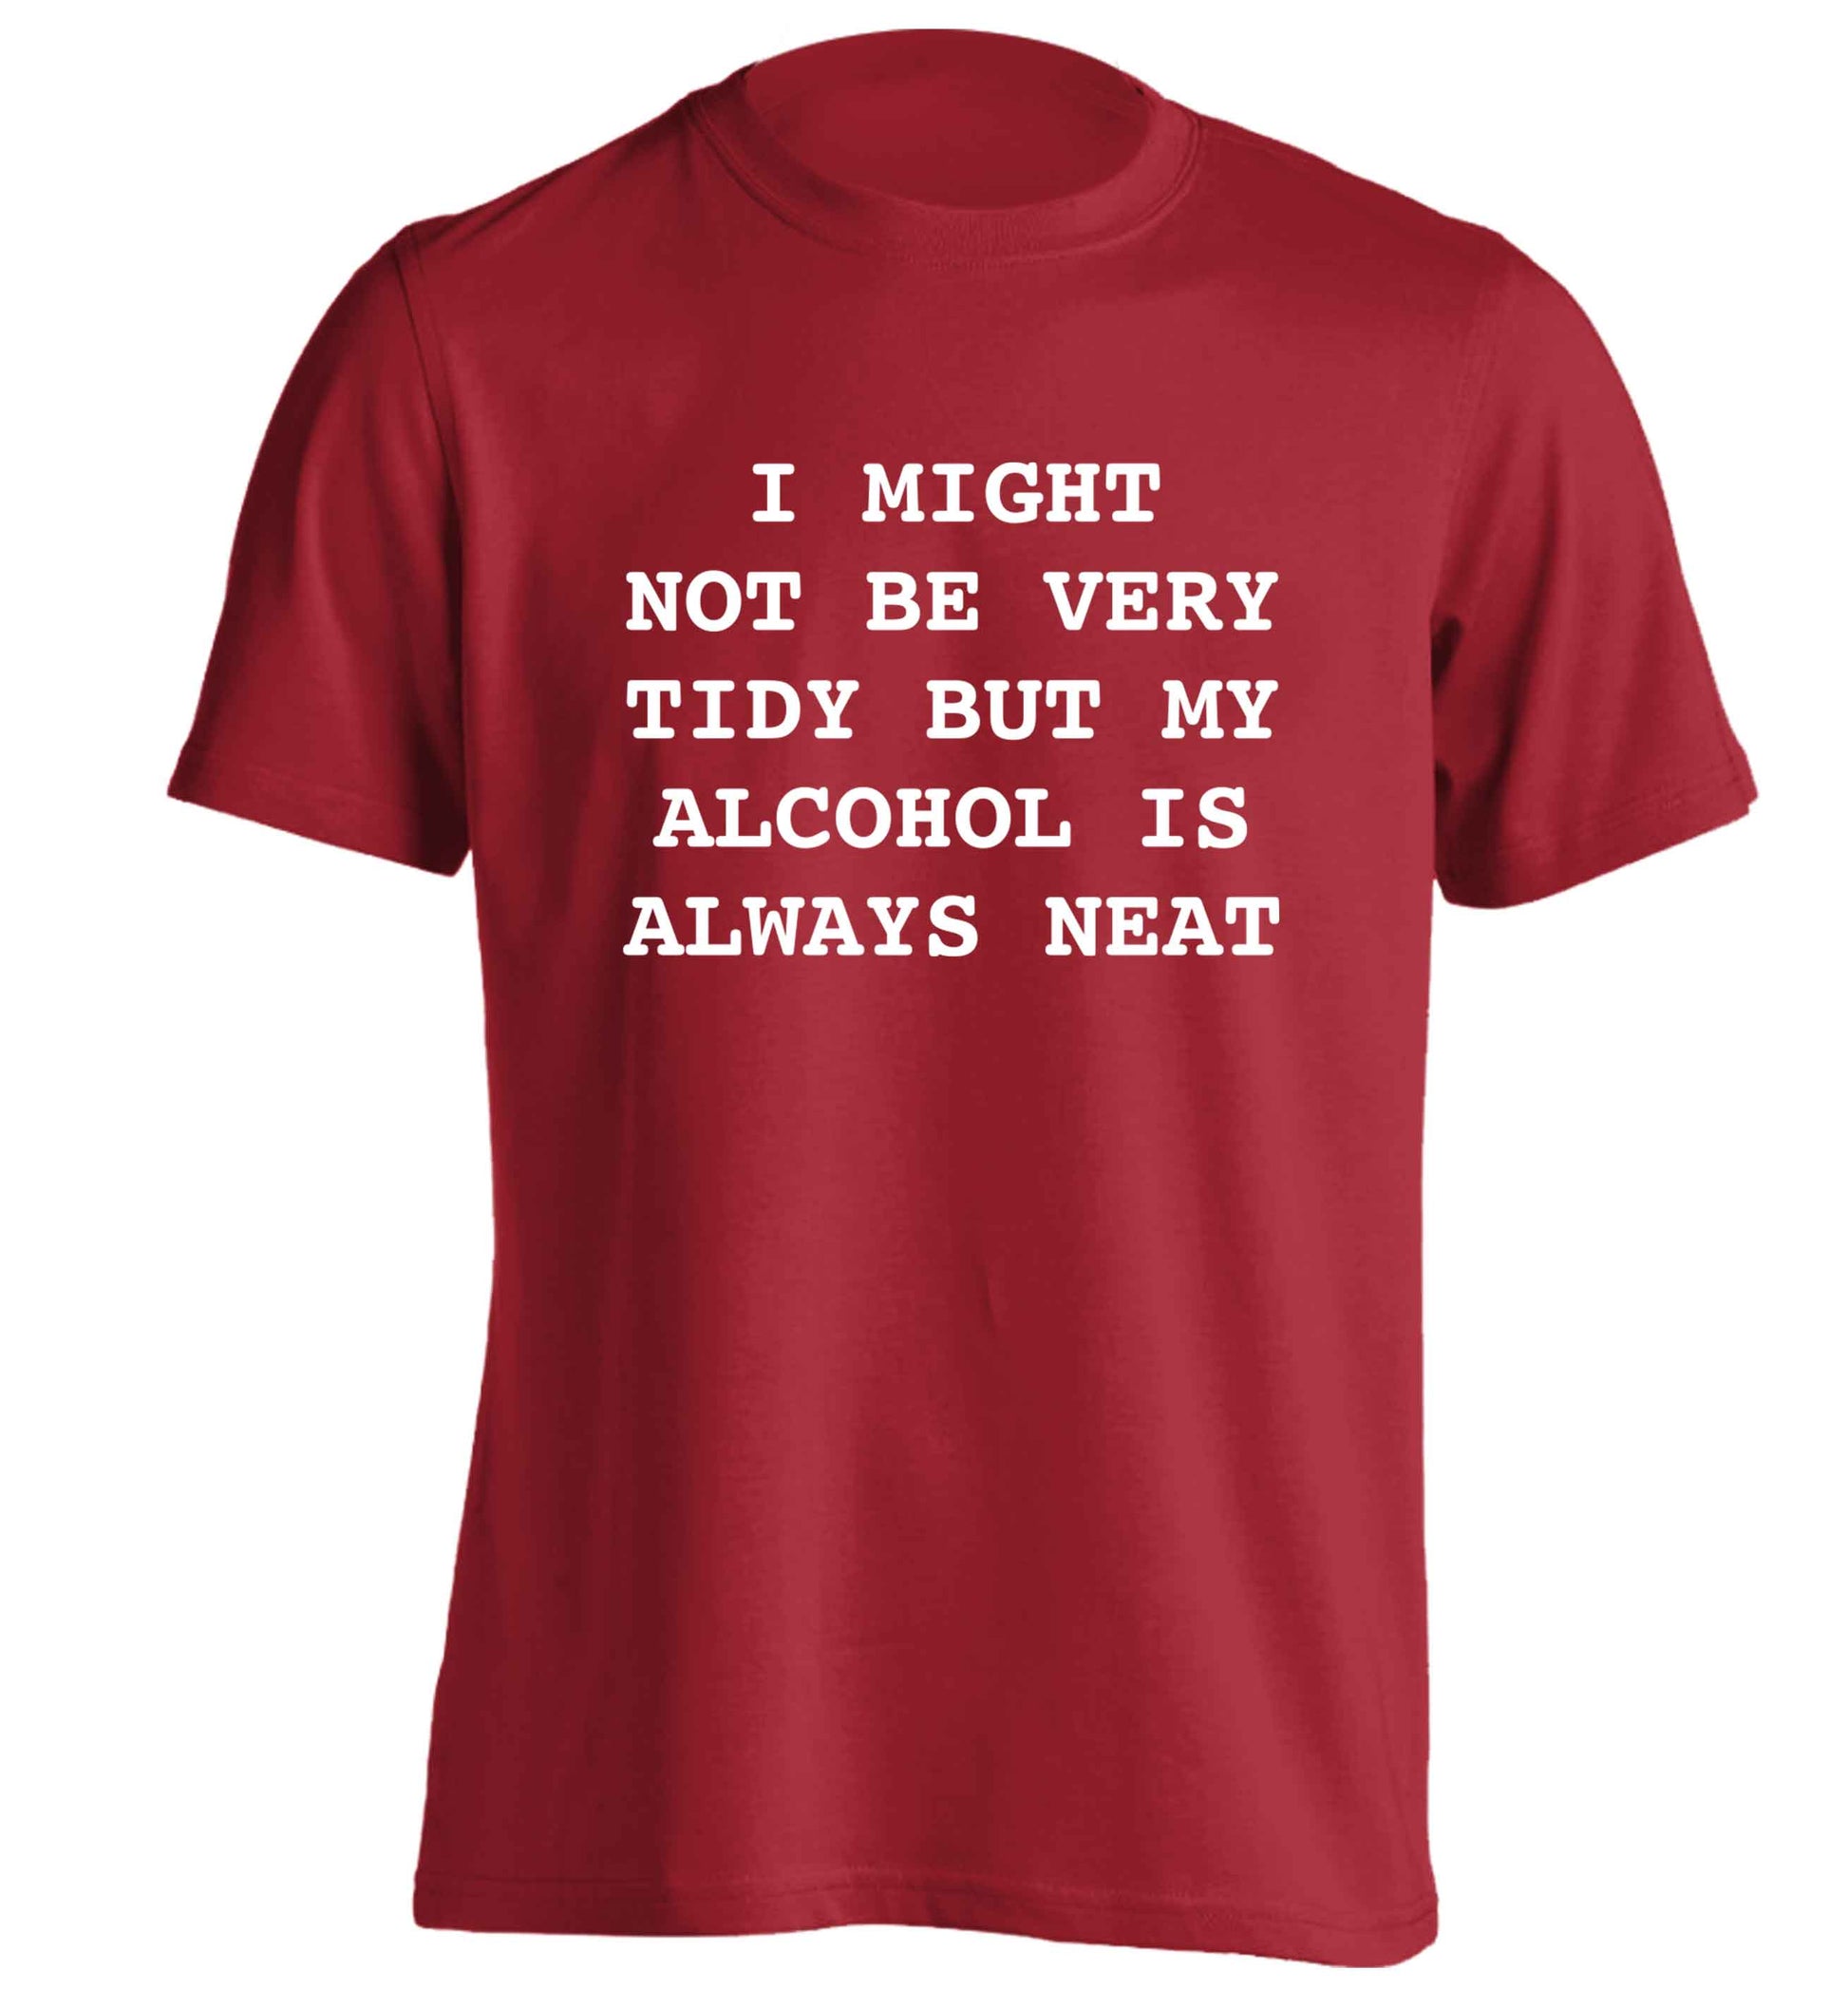 I might not be tidy but my alcohol is always neat adults unisex red Tshirt 2XL